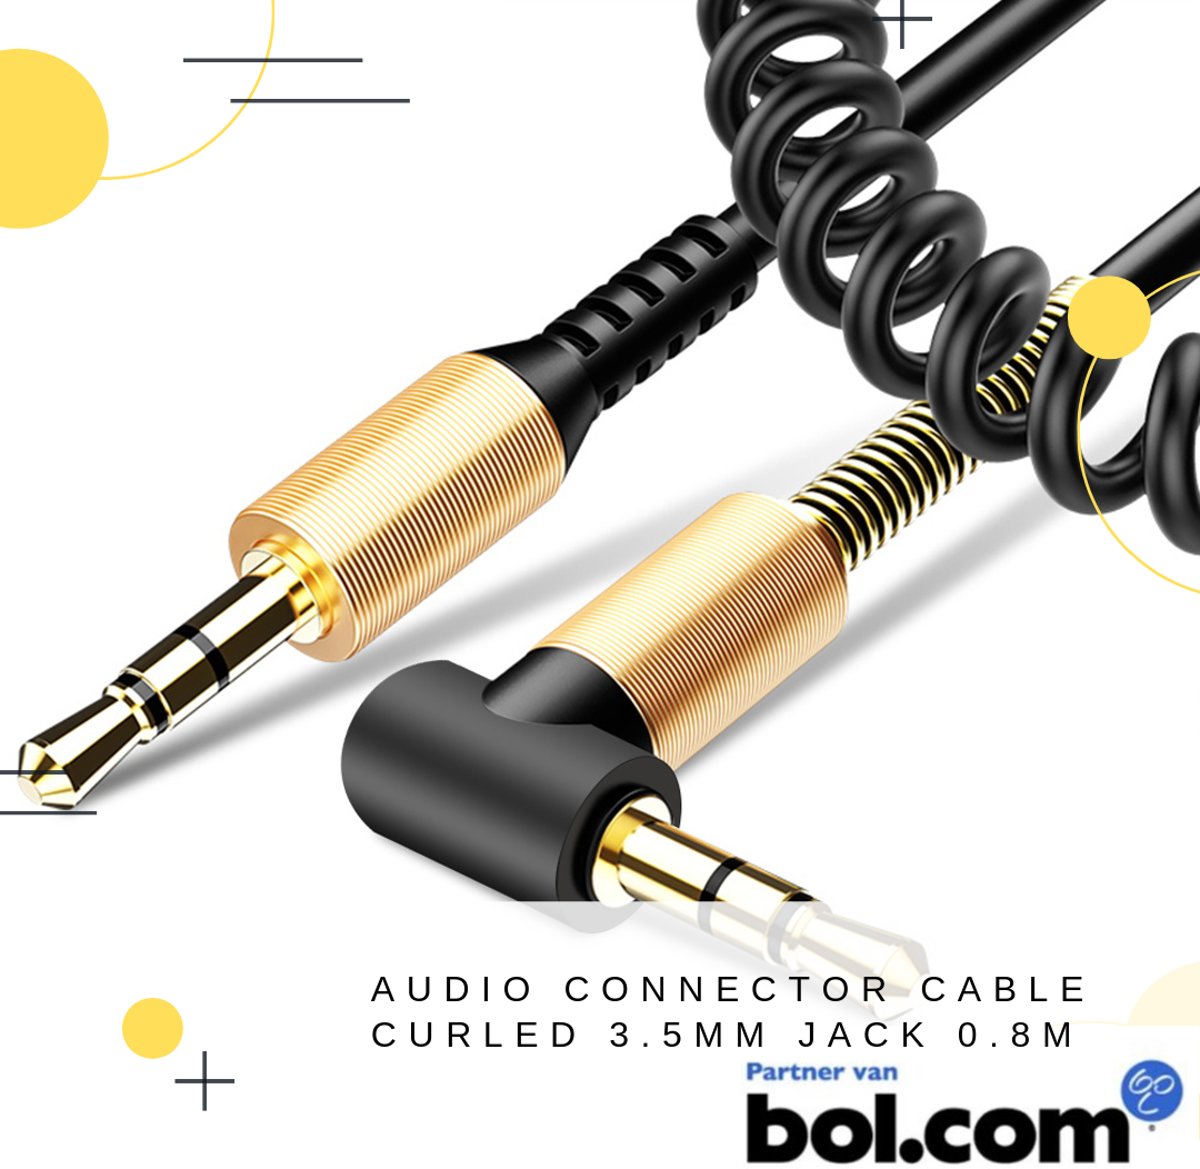 GoodvibeZ CurlZ | Stereo Audio Jack KabelS 3.5 mm - AUX Kabel Gold Plated - Male to Male - Zwart - 0,8 meter | Auto / Stereo / Mobiel / TV